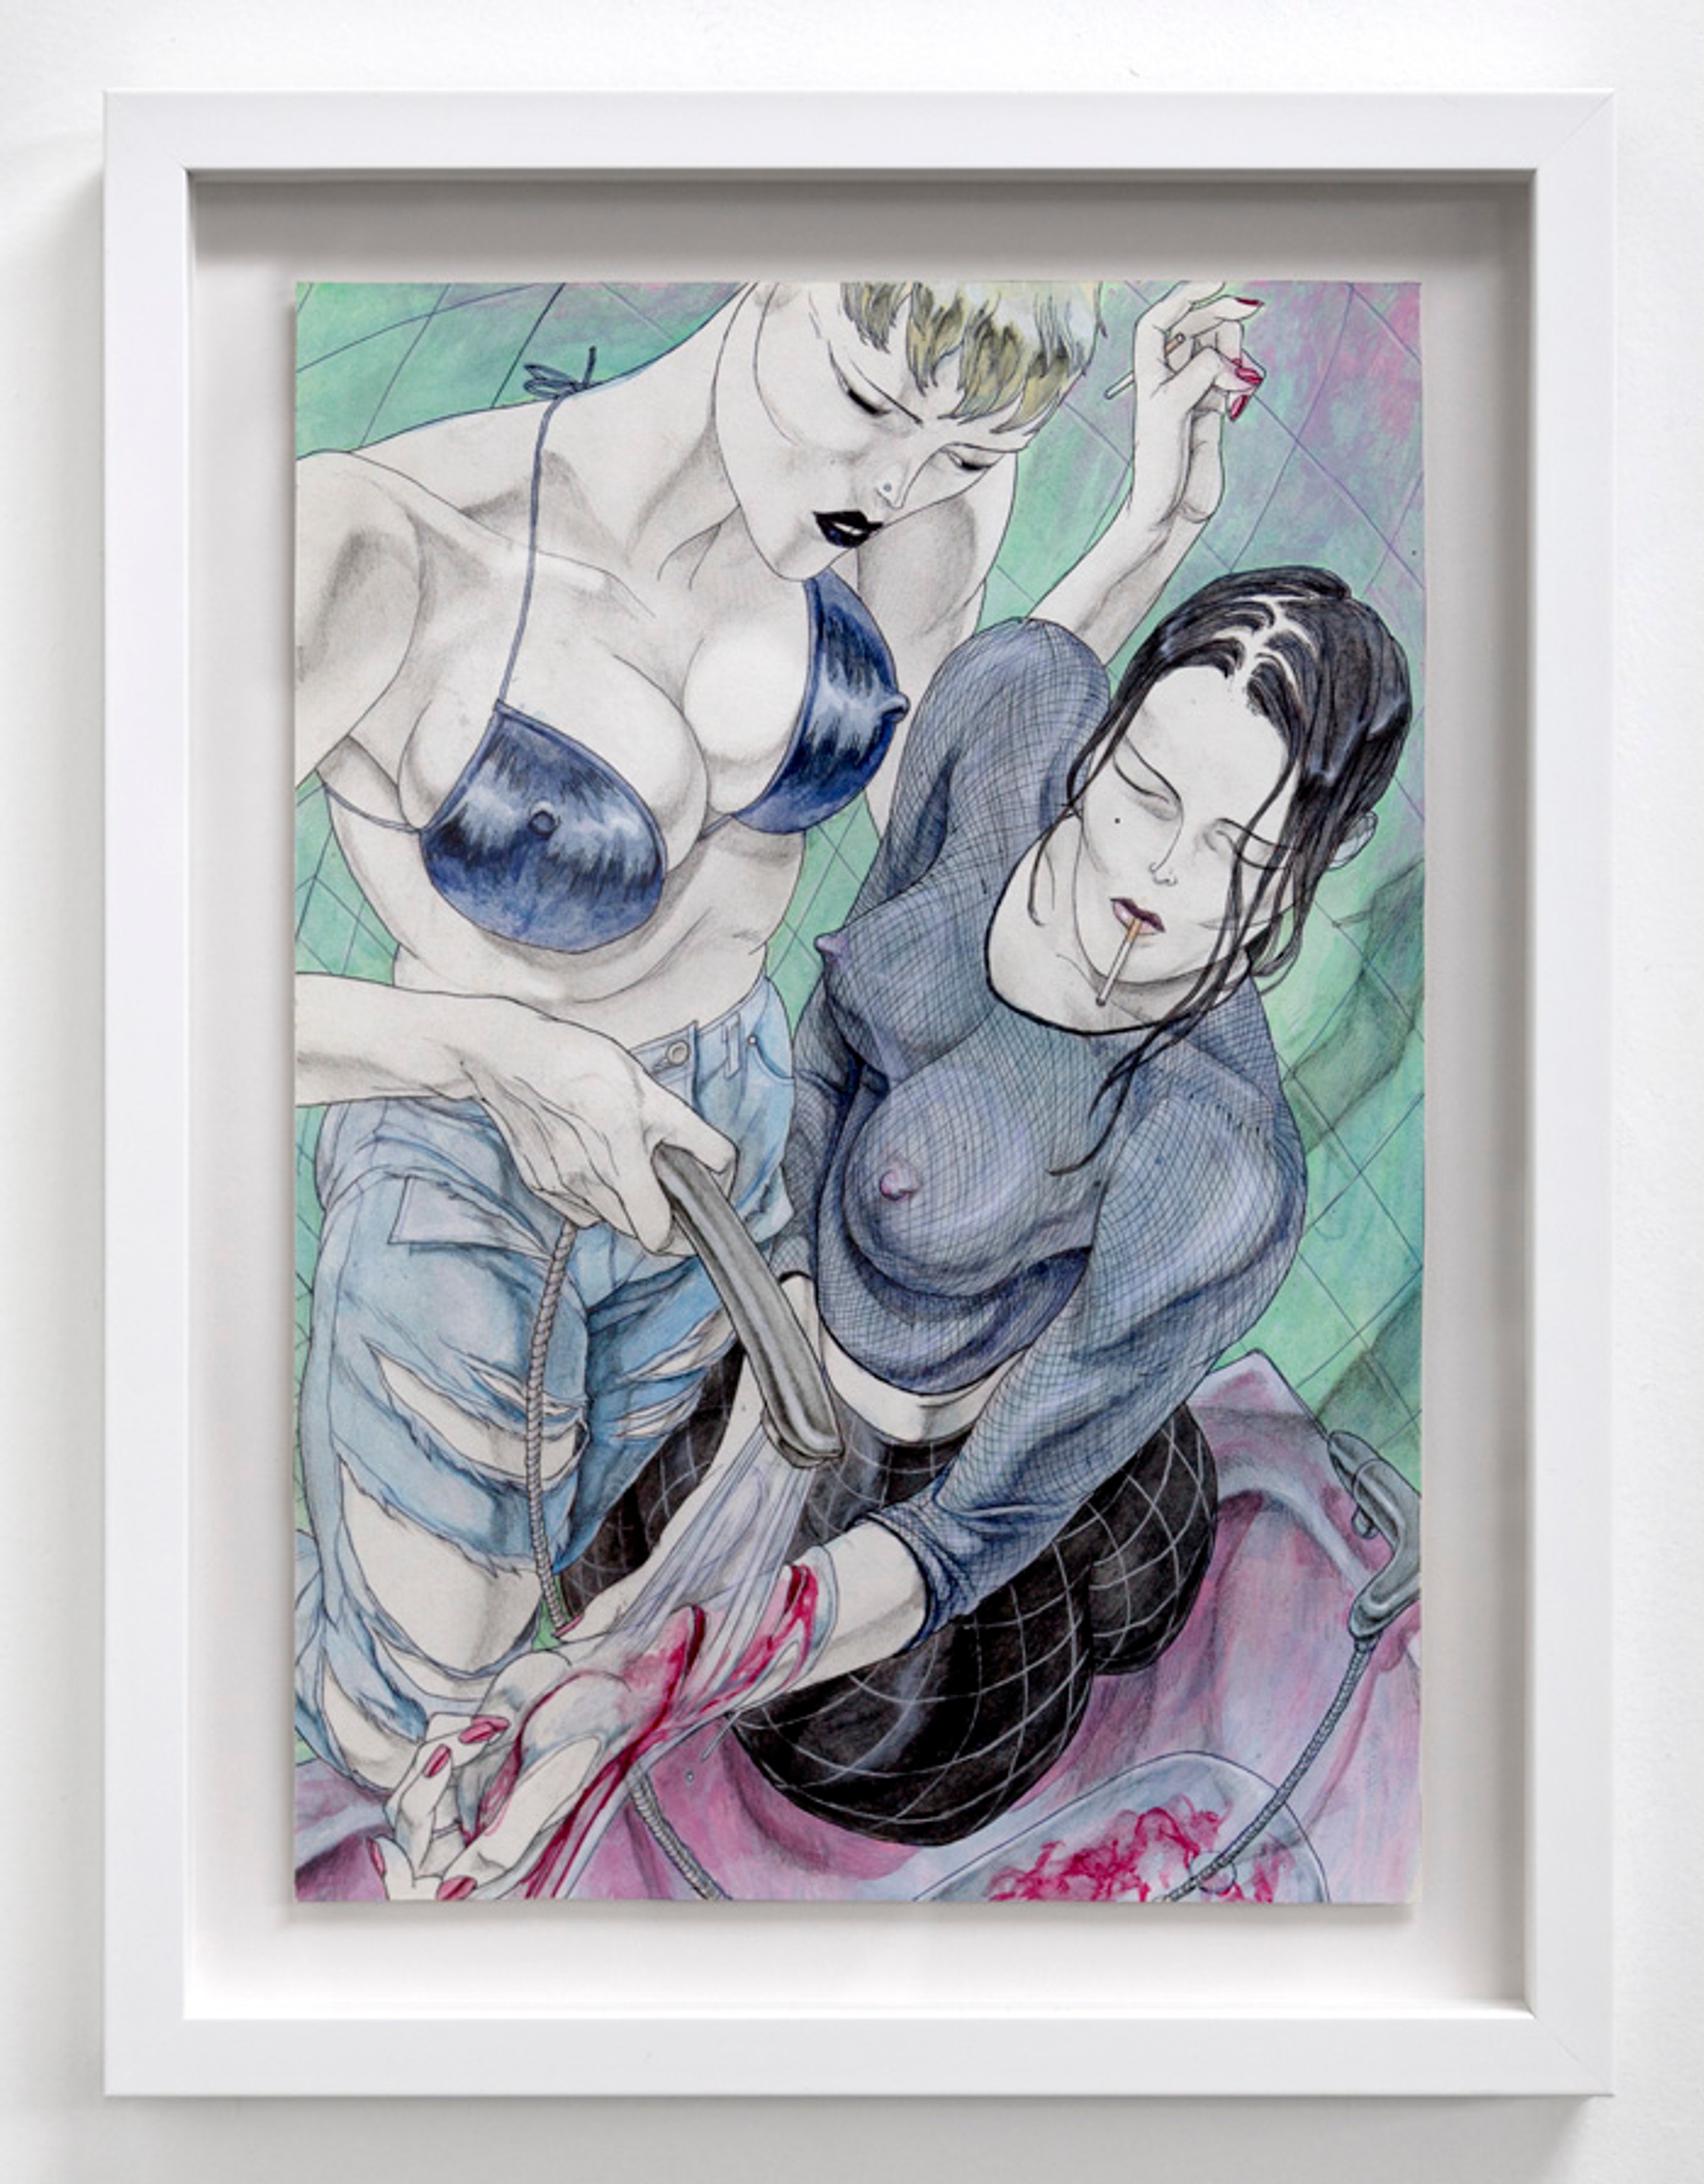 David Rappeneau, Untitled (2014). Acrylic, ballpoint pen, pencil, charcoal pencil on paper. 15.75h x 11w in.